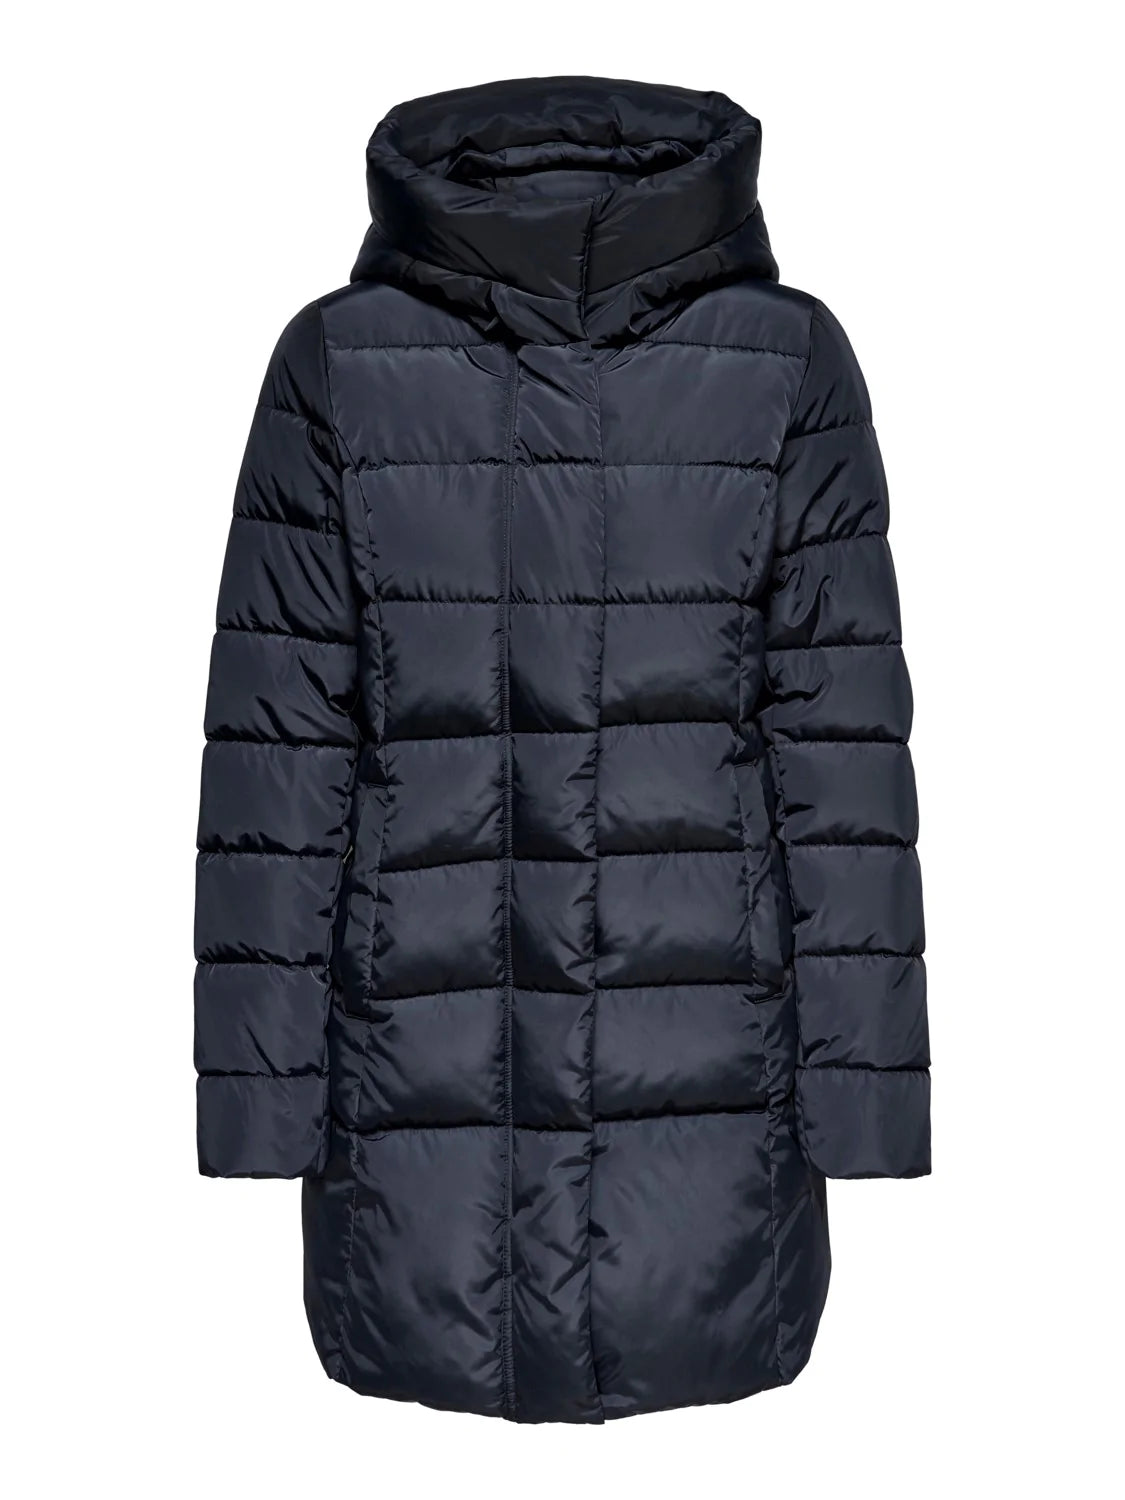 ONLY women's navy quilted coat